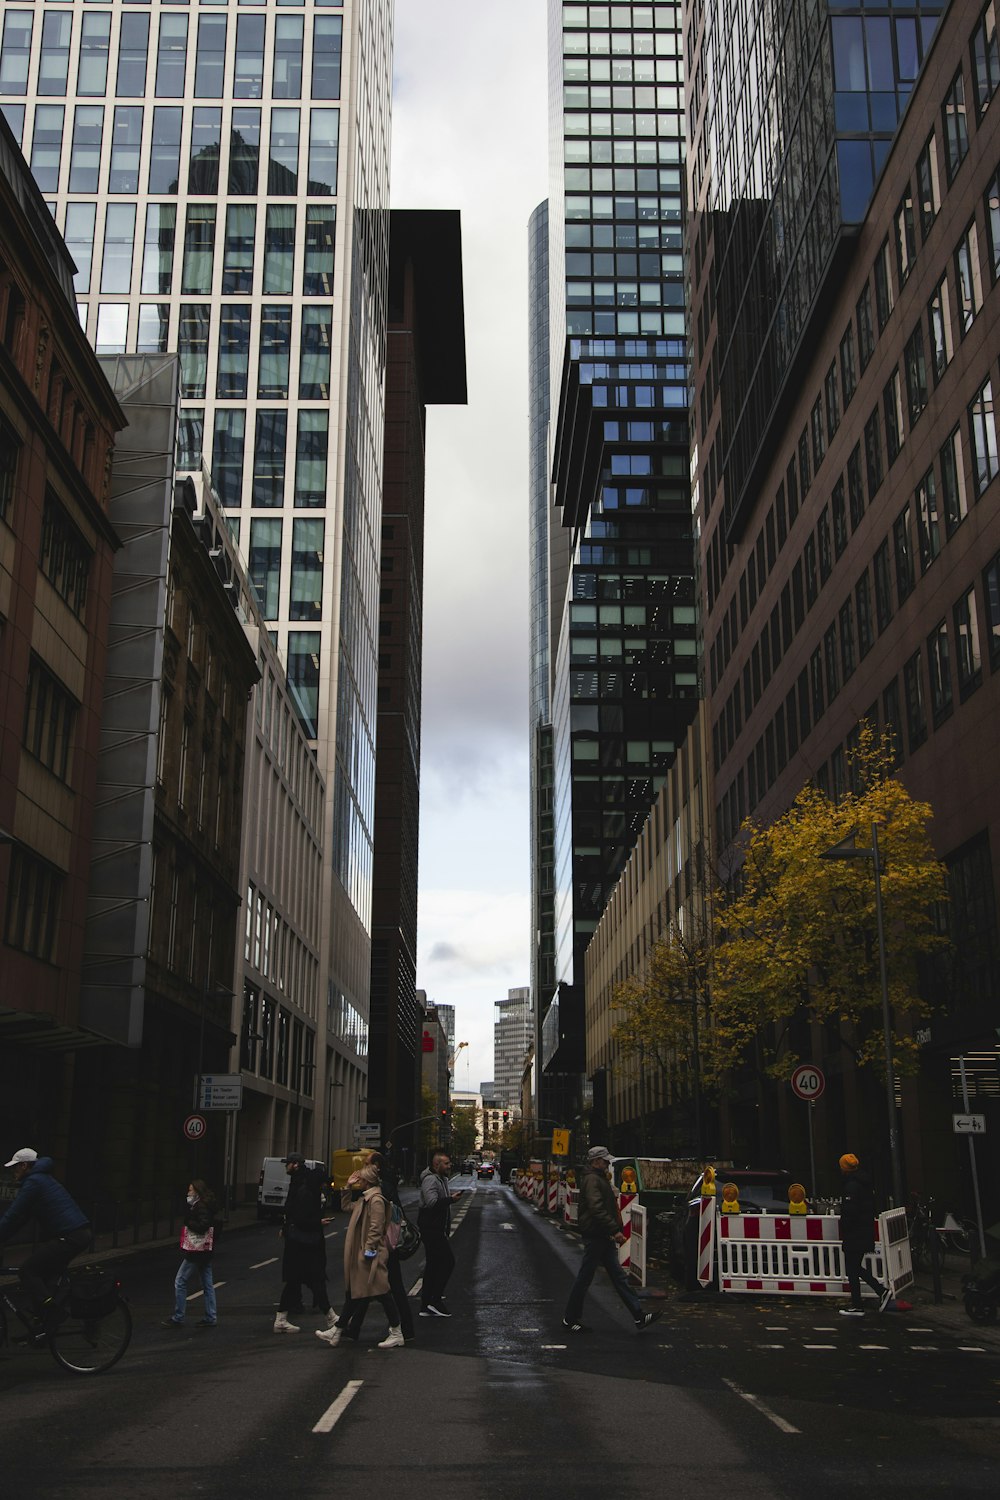 a group of people walking on a street between tall buildings